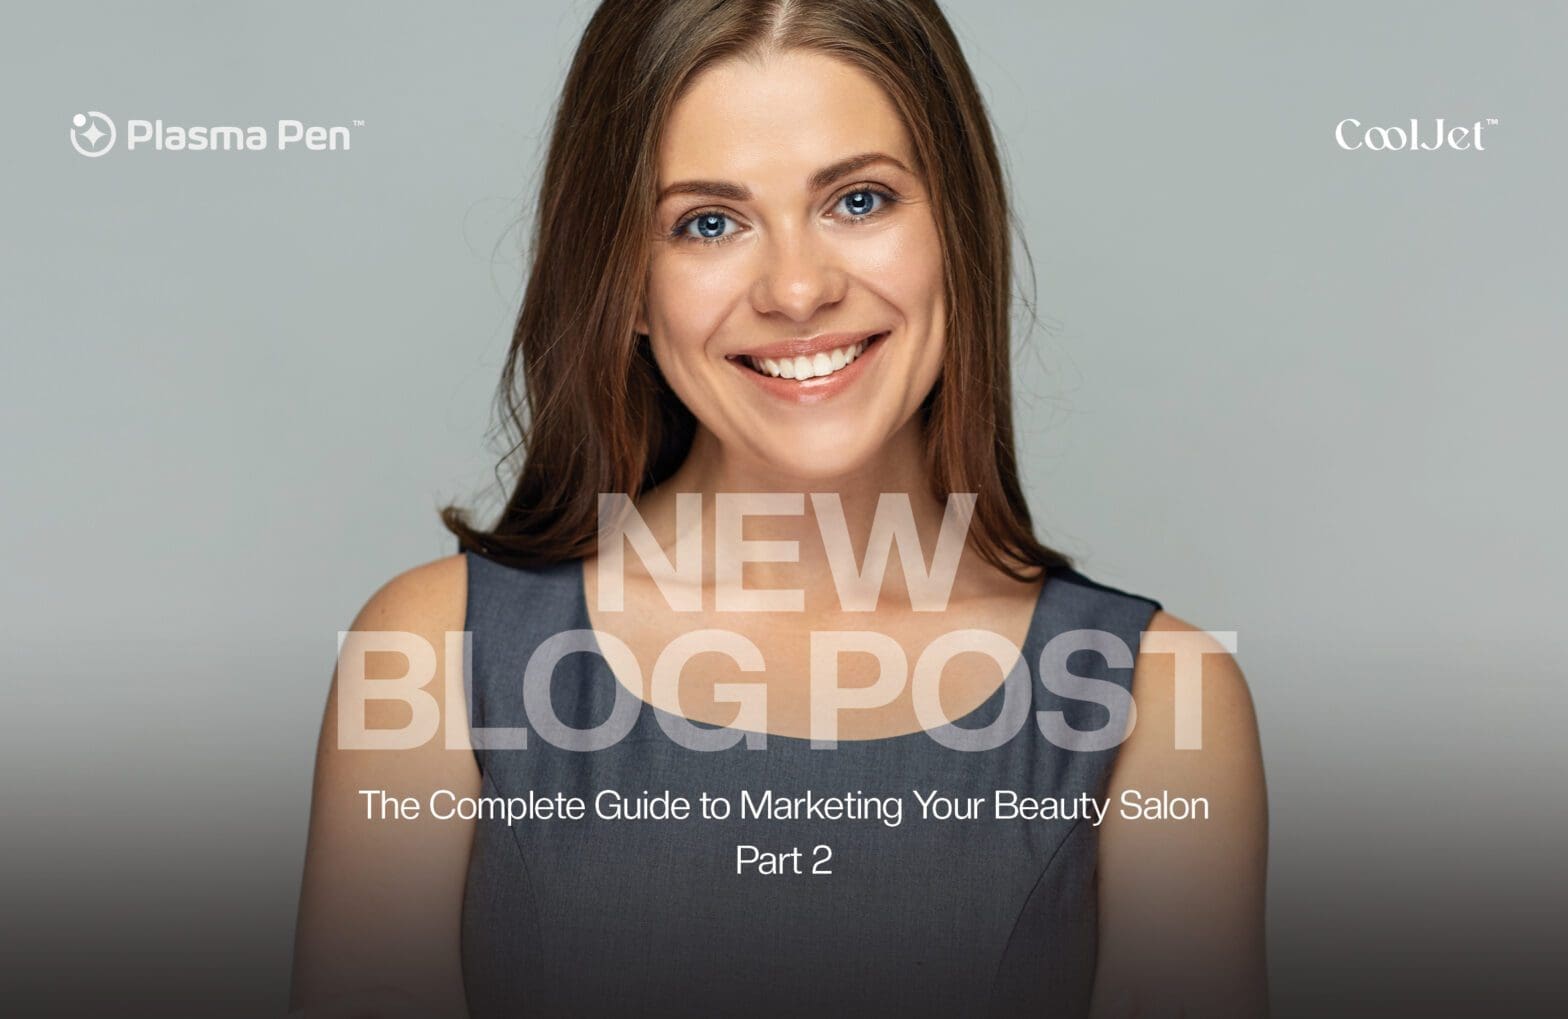 The Complete Guide to Marketing Your Beauty Salon - Part 2